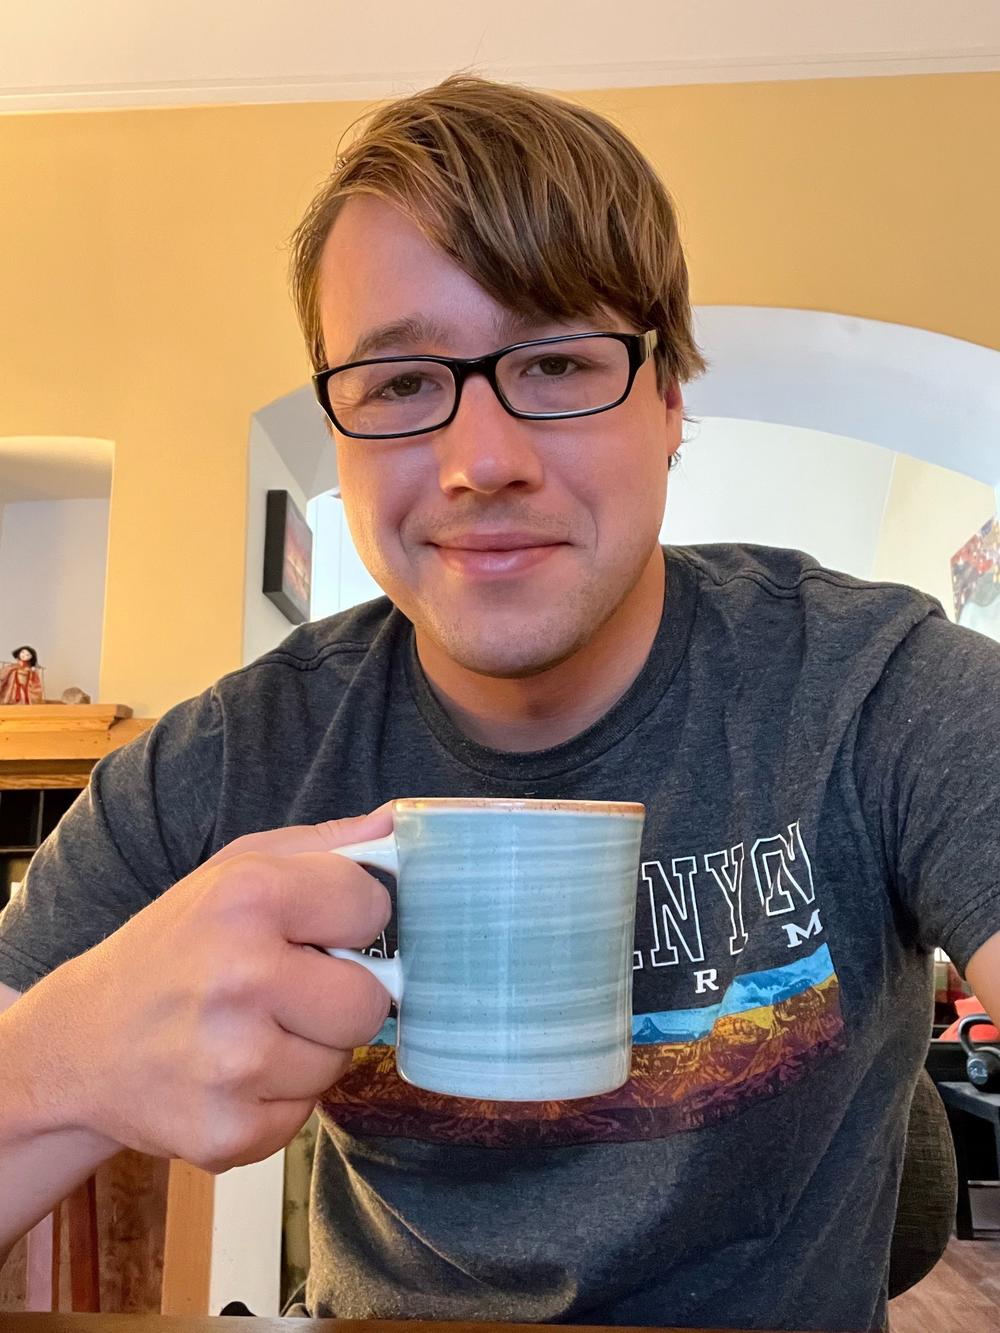 Luke Simmons, 29, starts every morning with a cup or two of black coffee, usually Folgers.